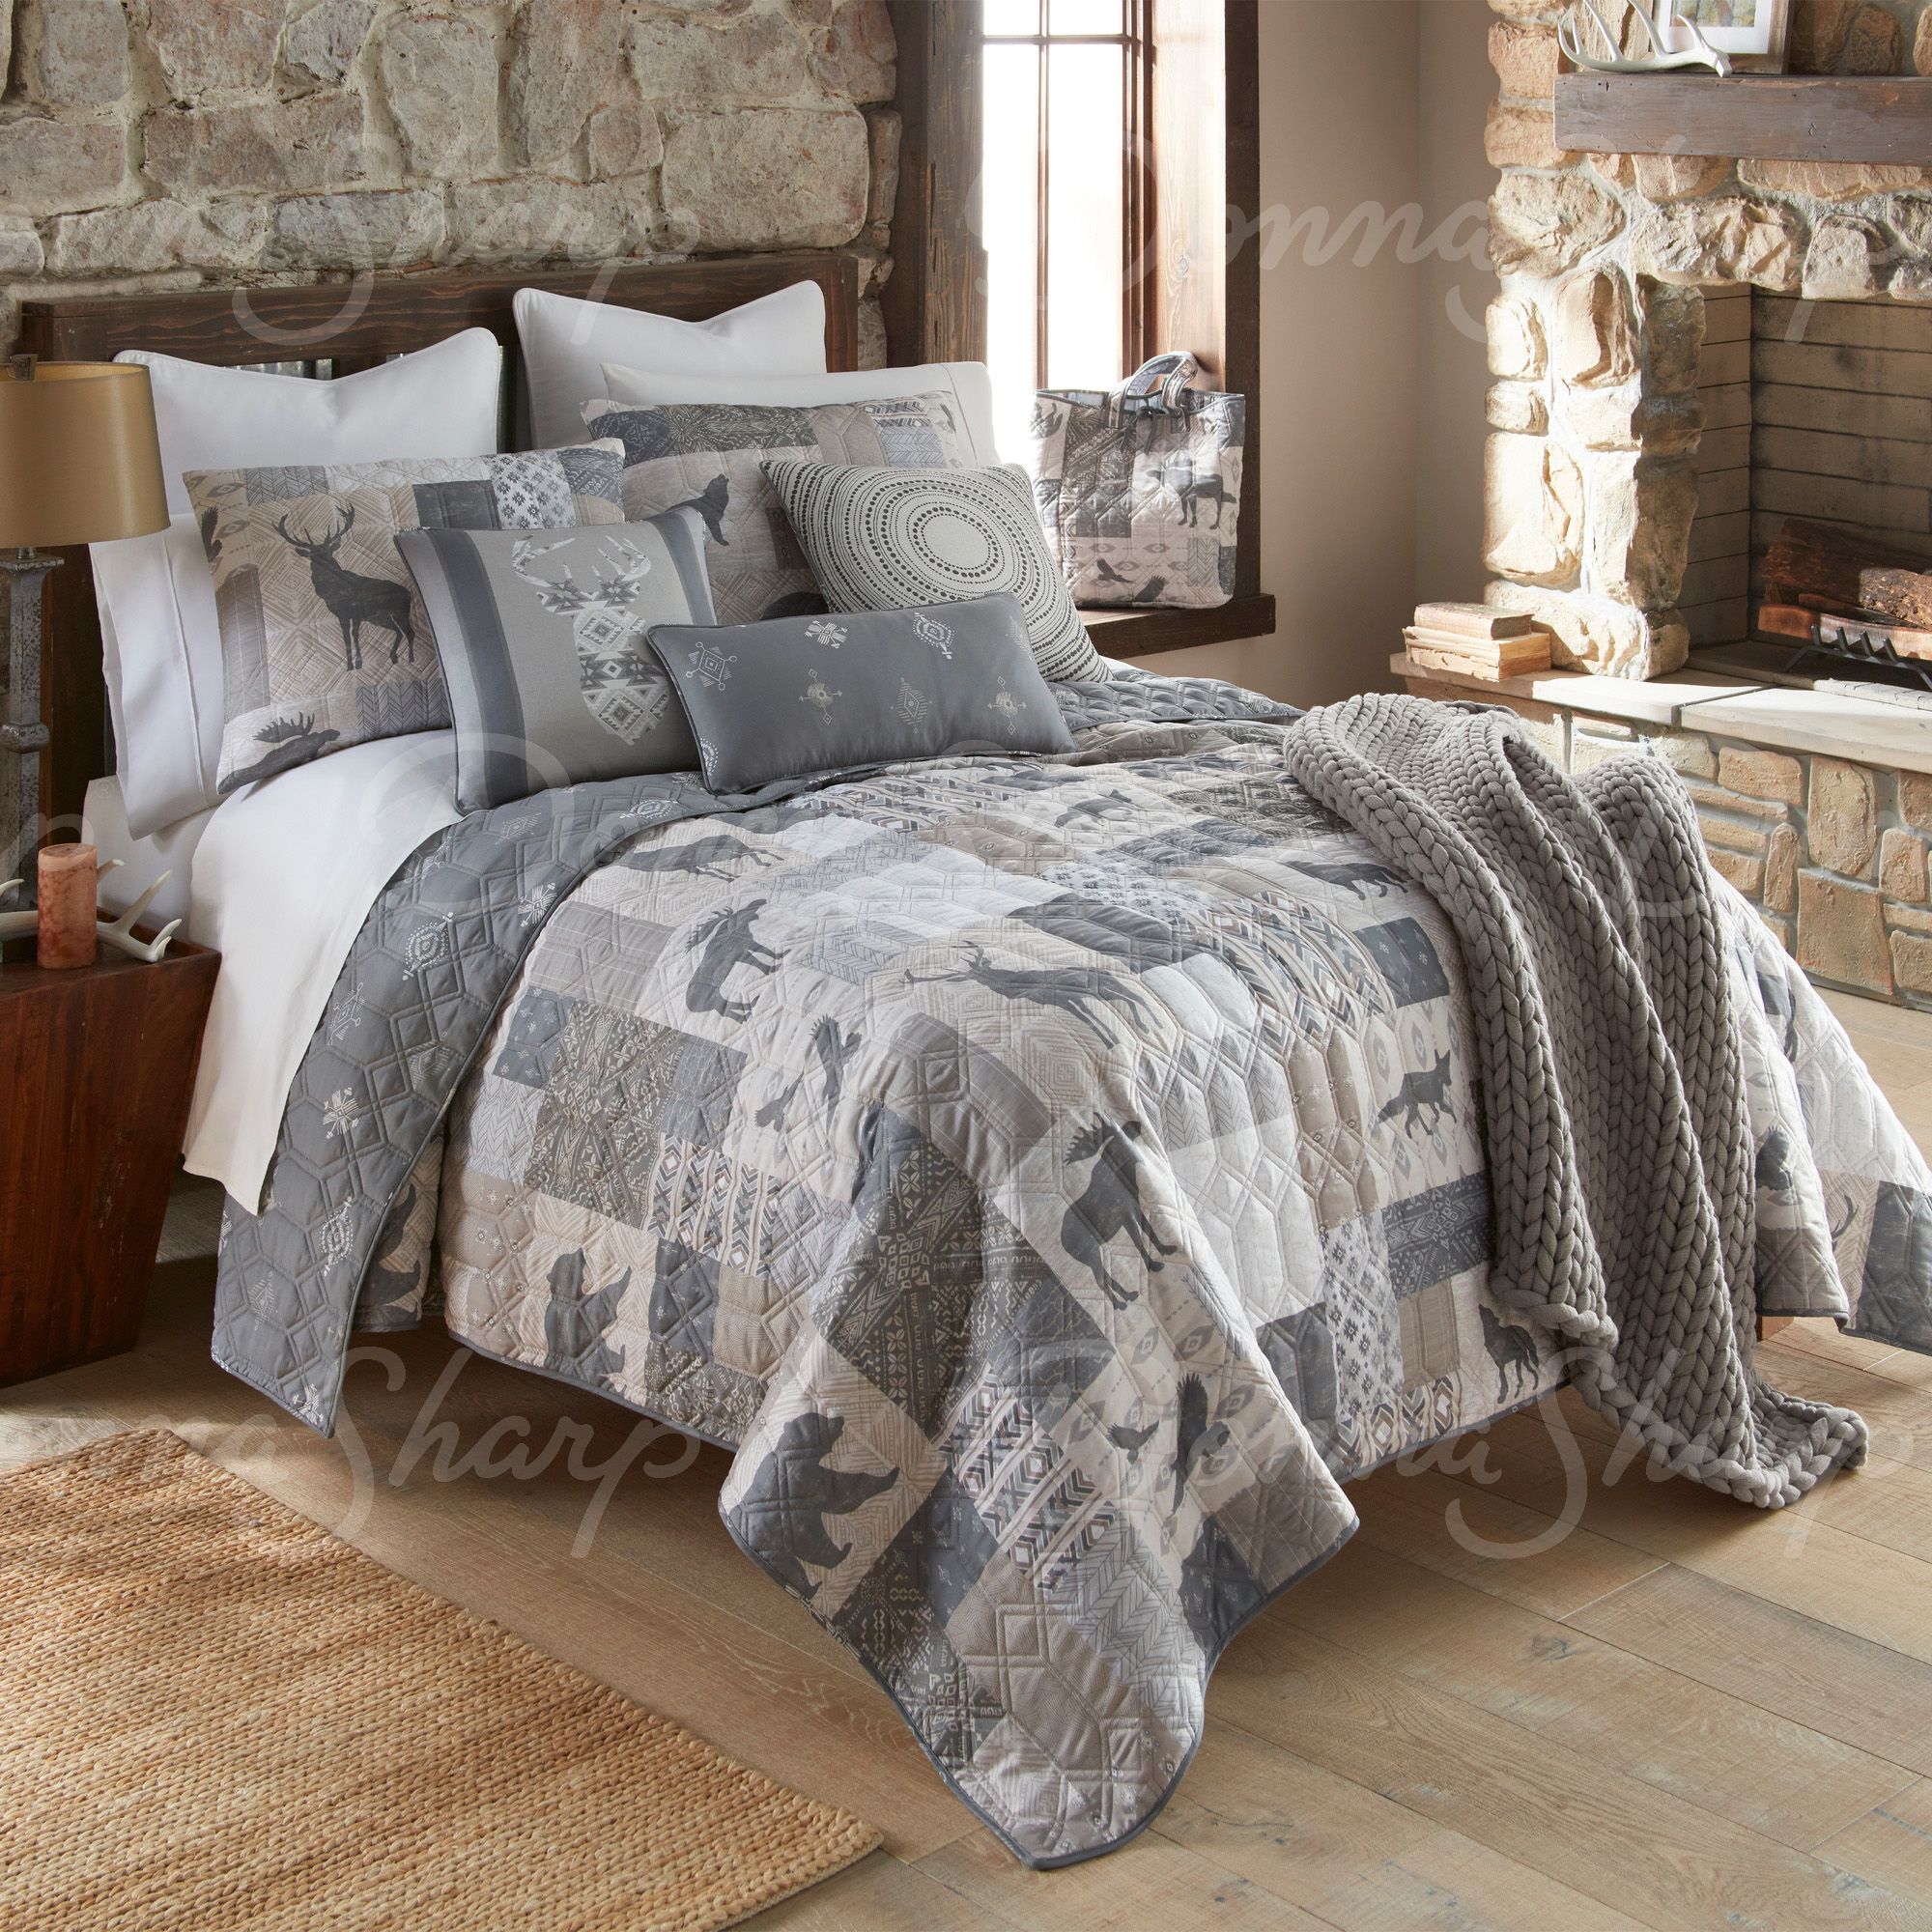 bed quilts designs